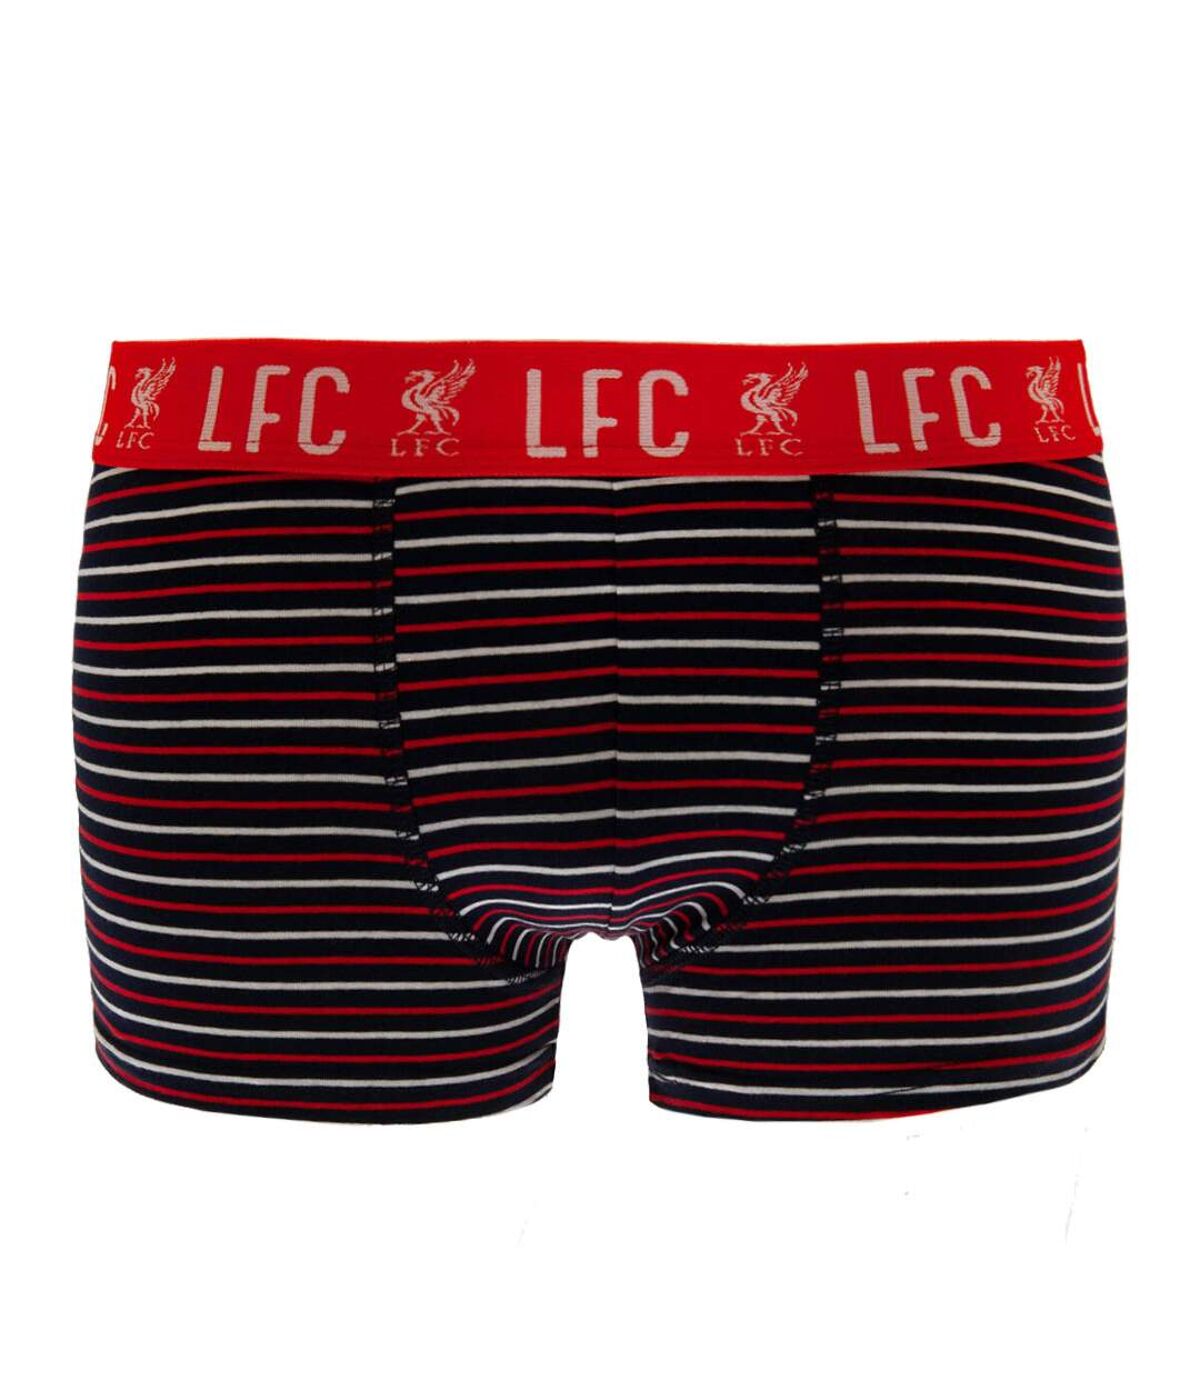 Liverpool FC Mens Boxer Shorts Set (Pack of 2) (Gray/Black/Red)